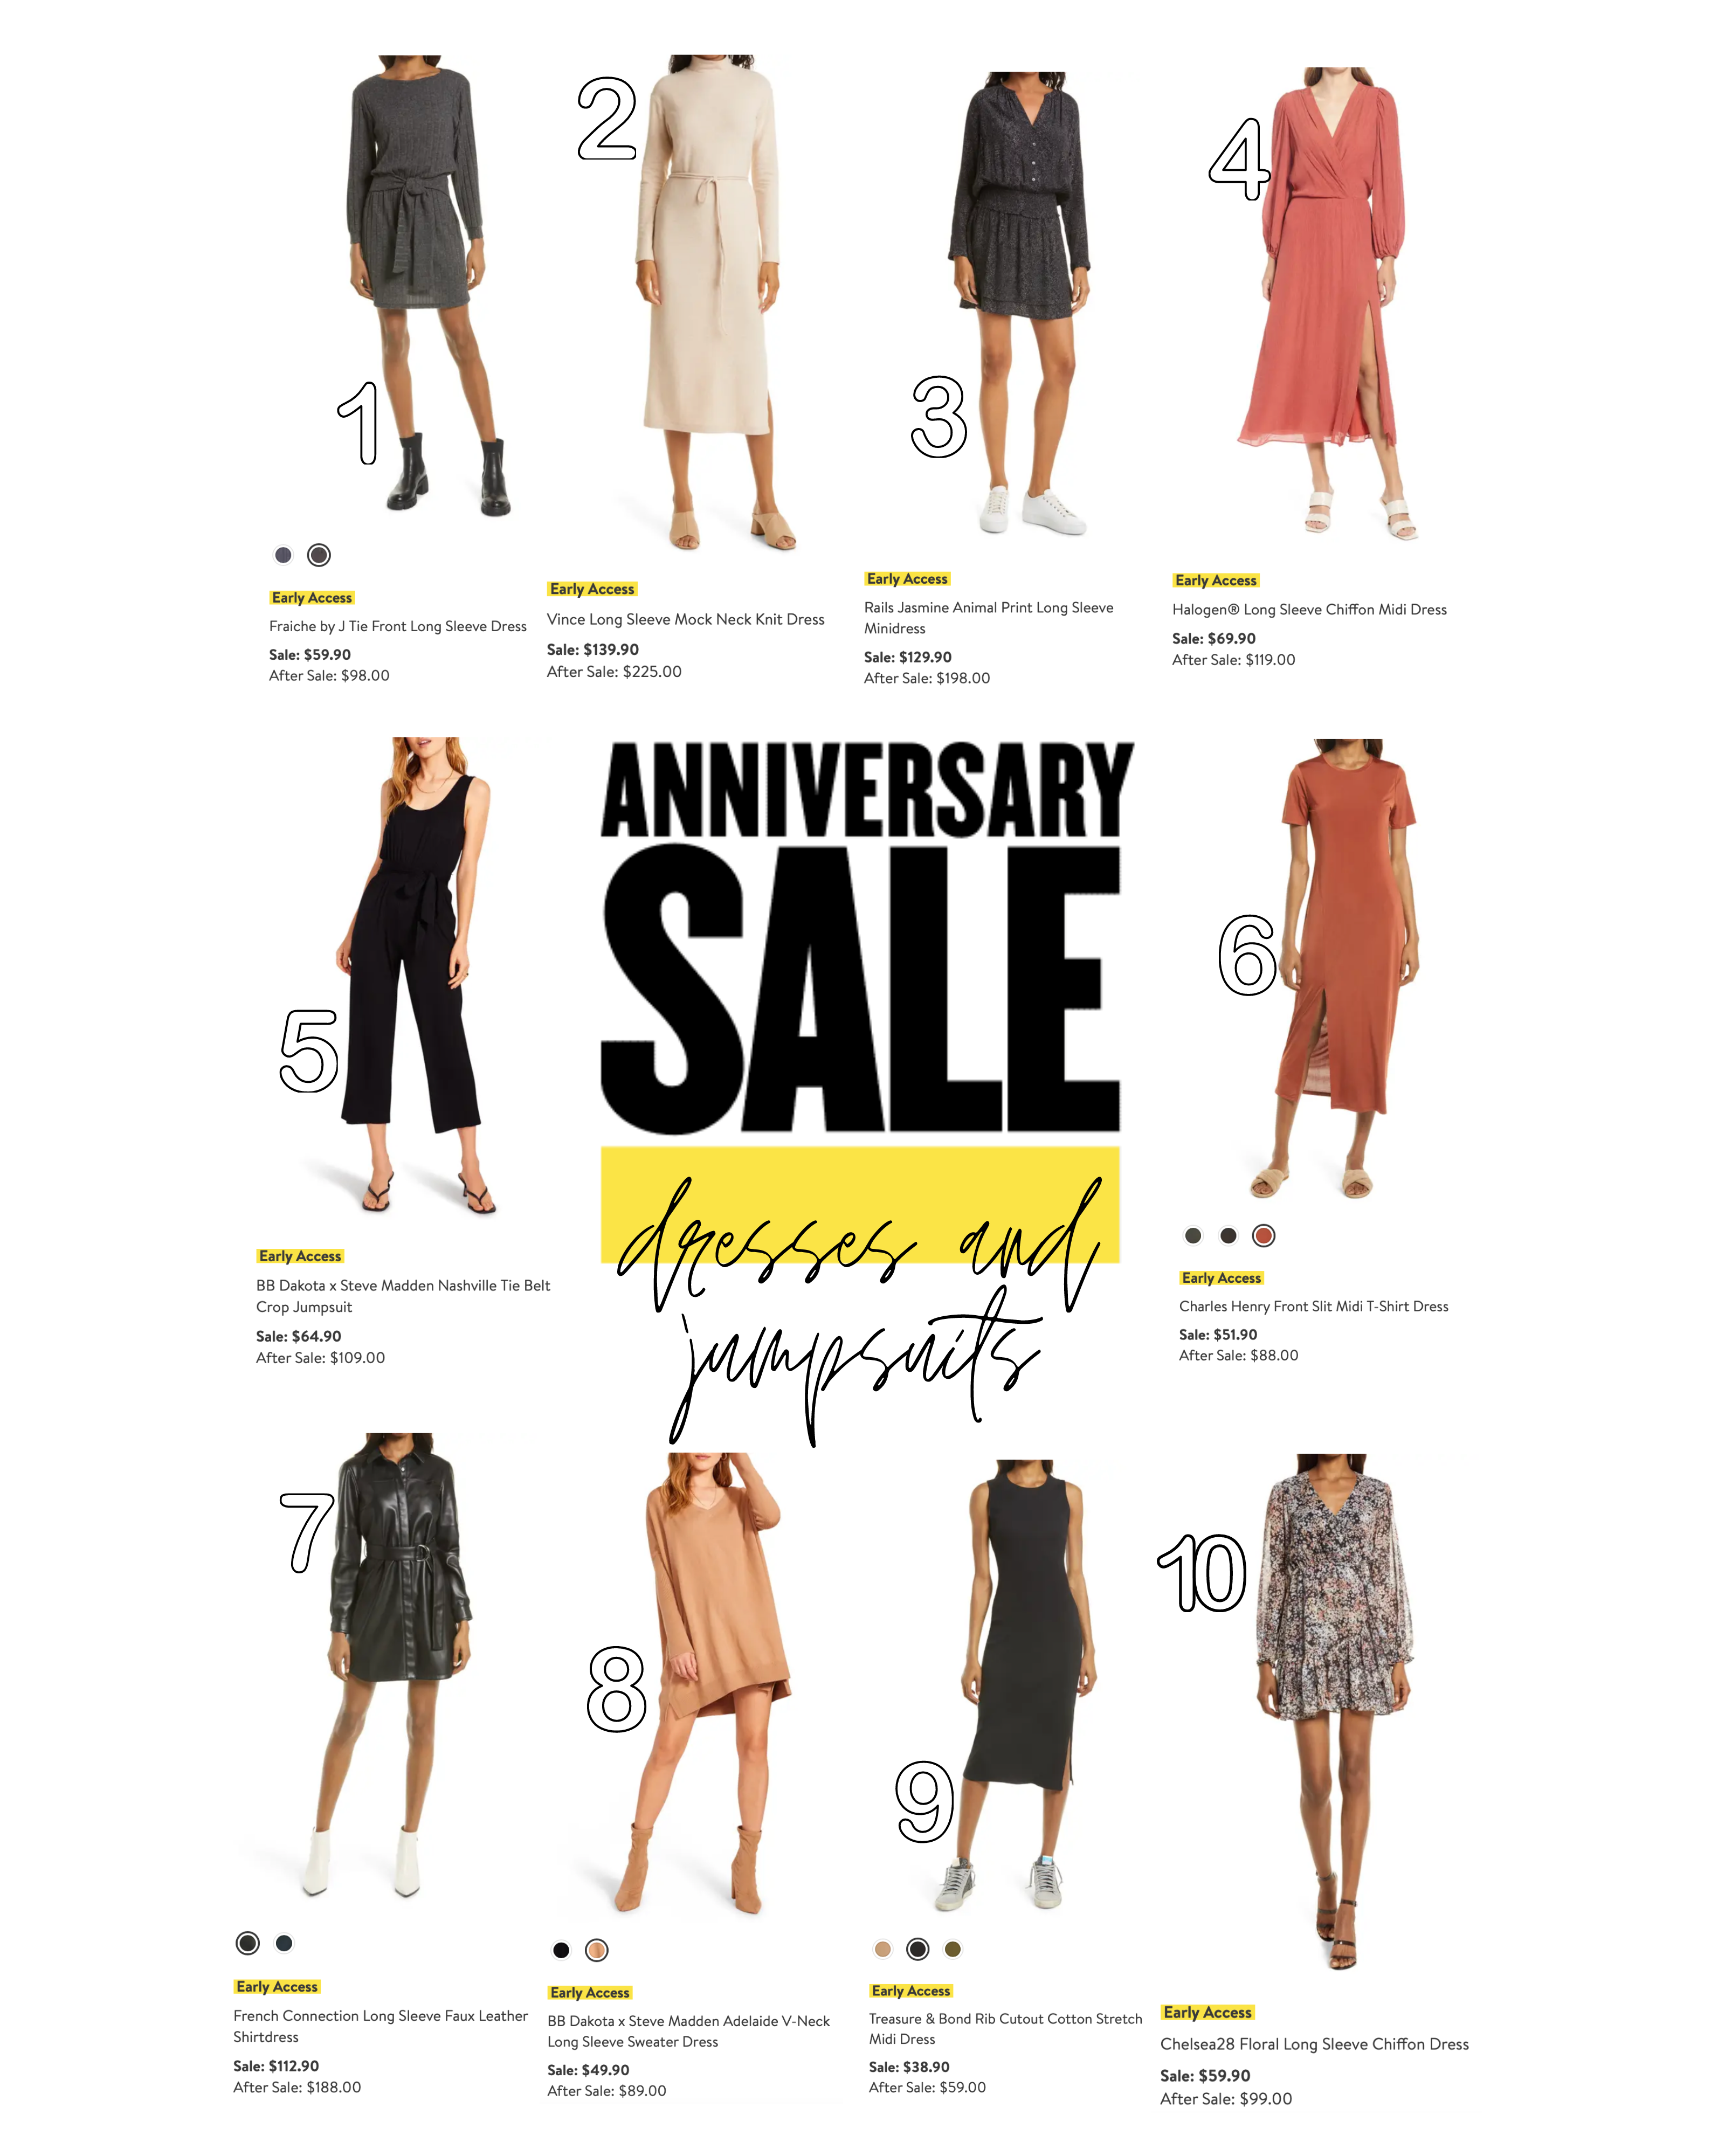 Nordstrom Sale 2021 Roundup The best dresses daily dose of charm nsale Lauren Emily Lindmark